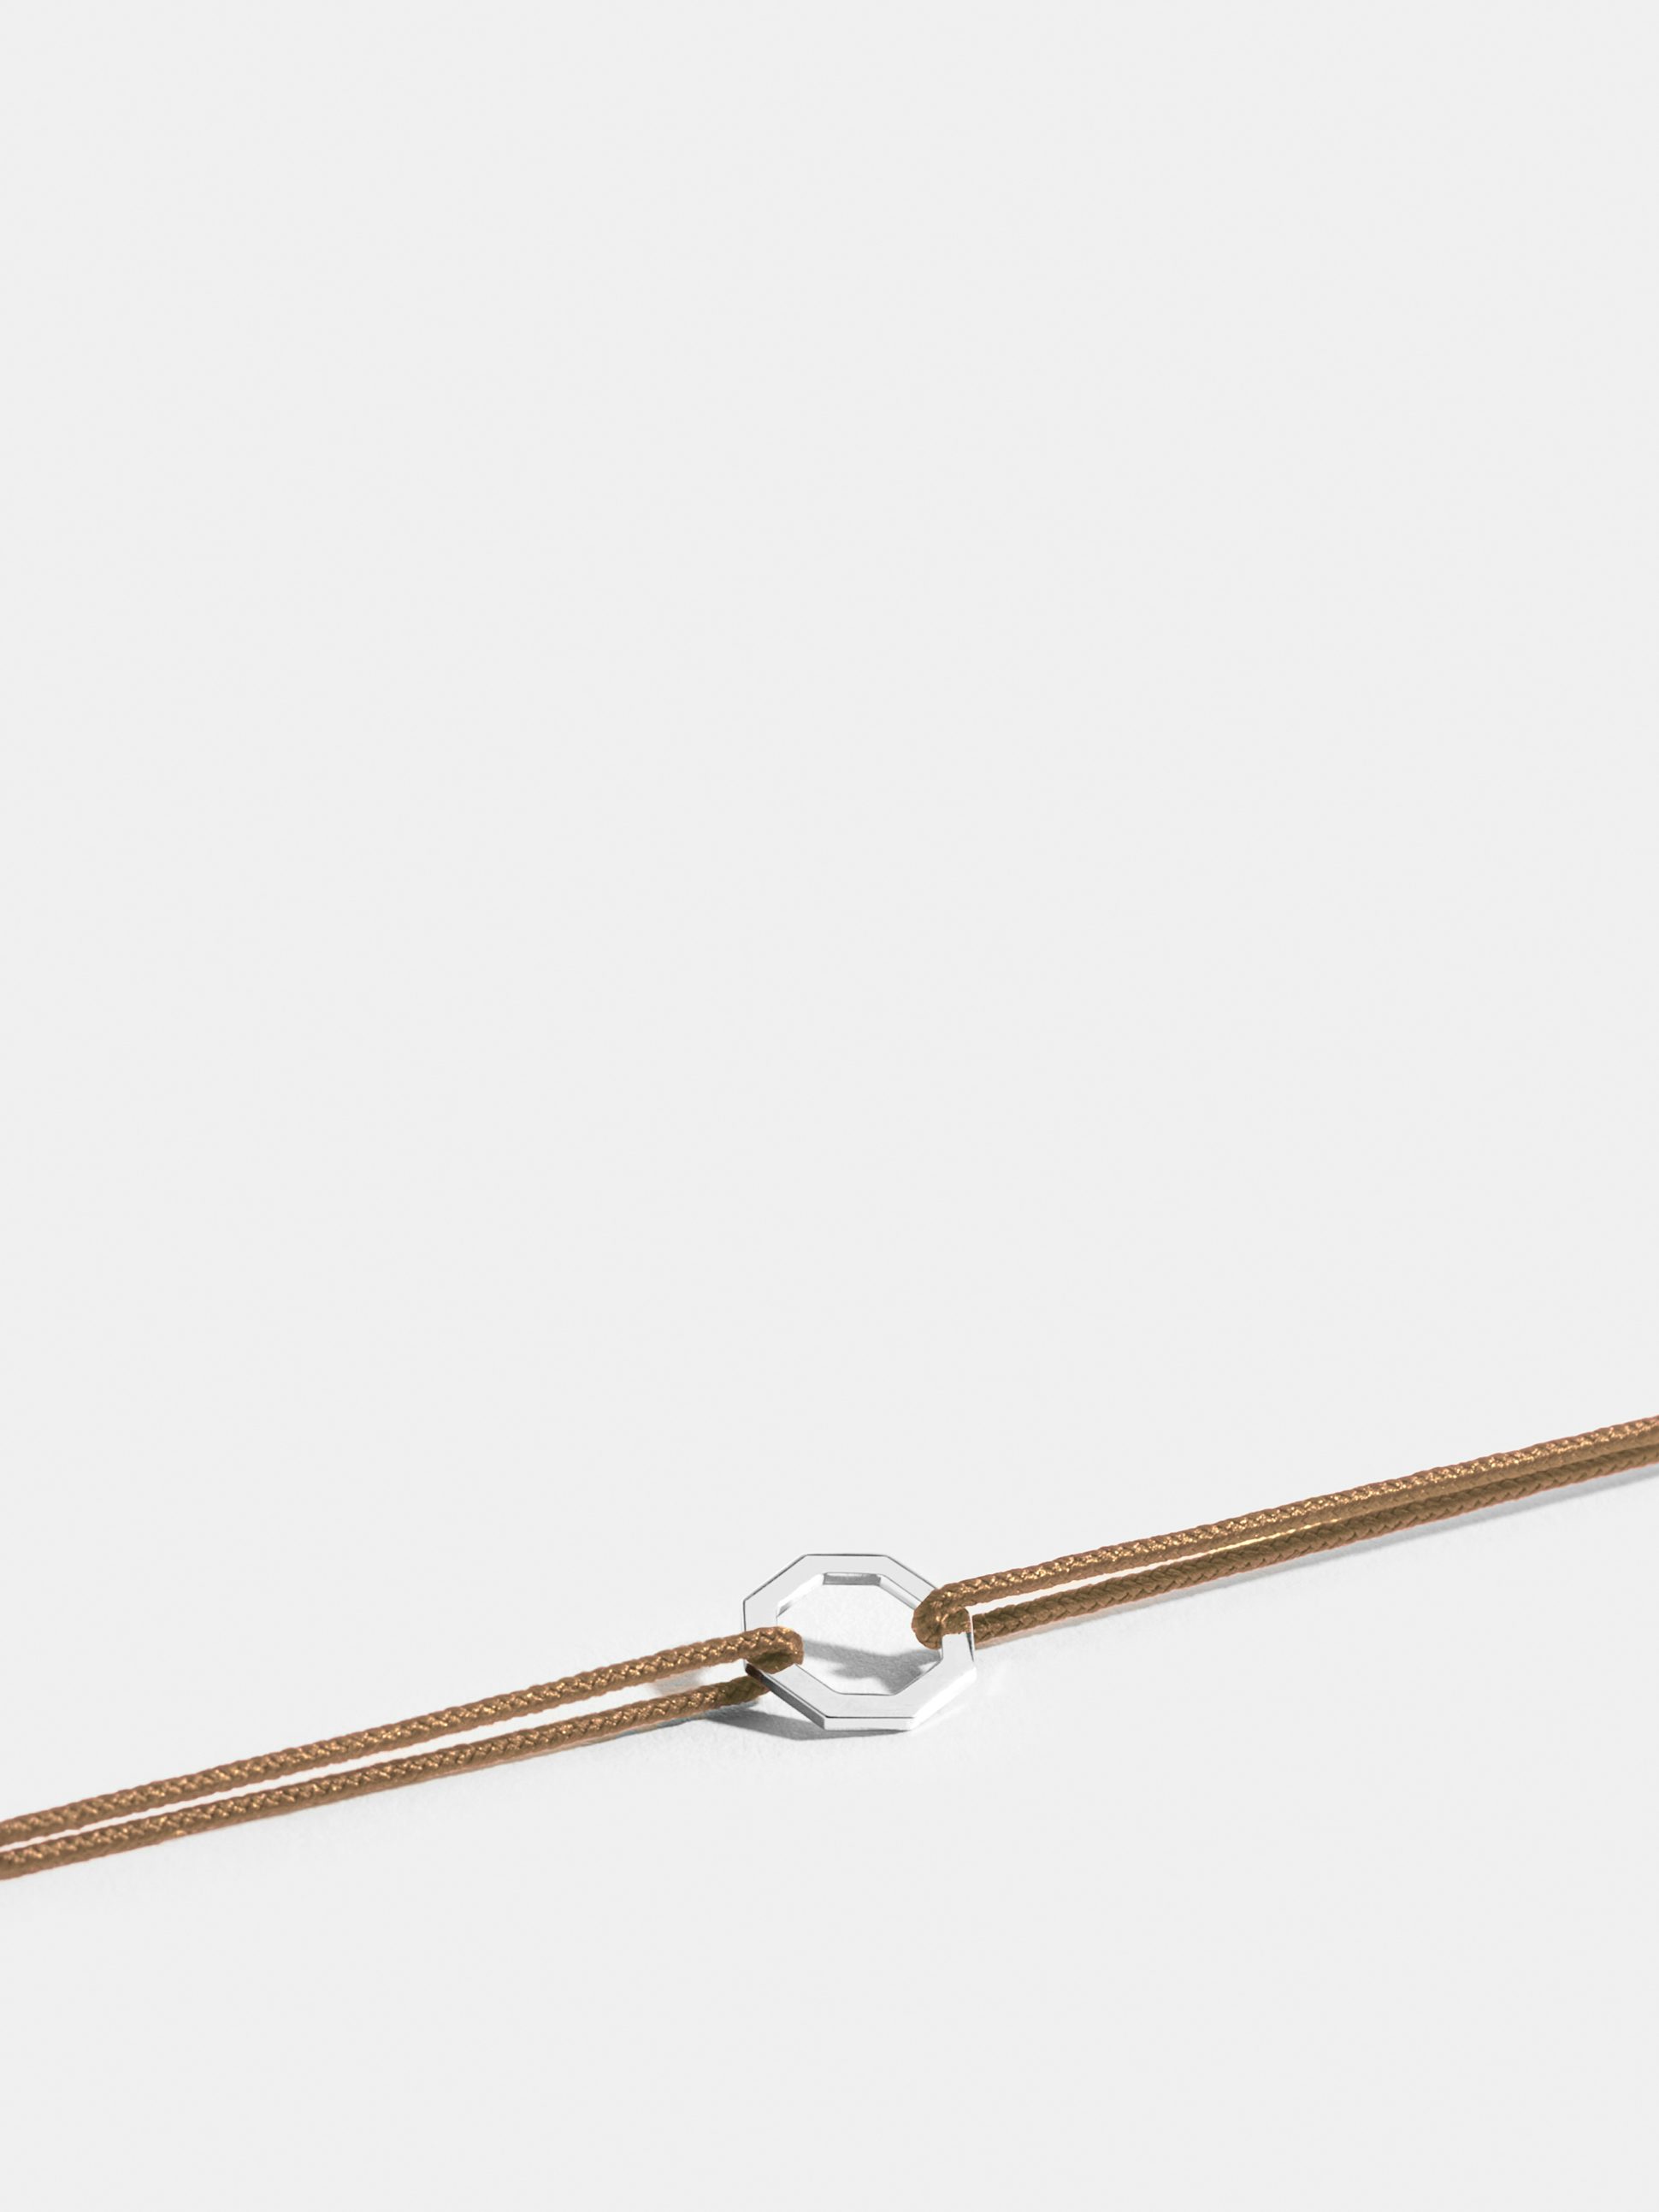 Octogone motif in 18k Fairmined ethical white gold, on a honey yellow cord. 